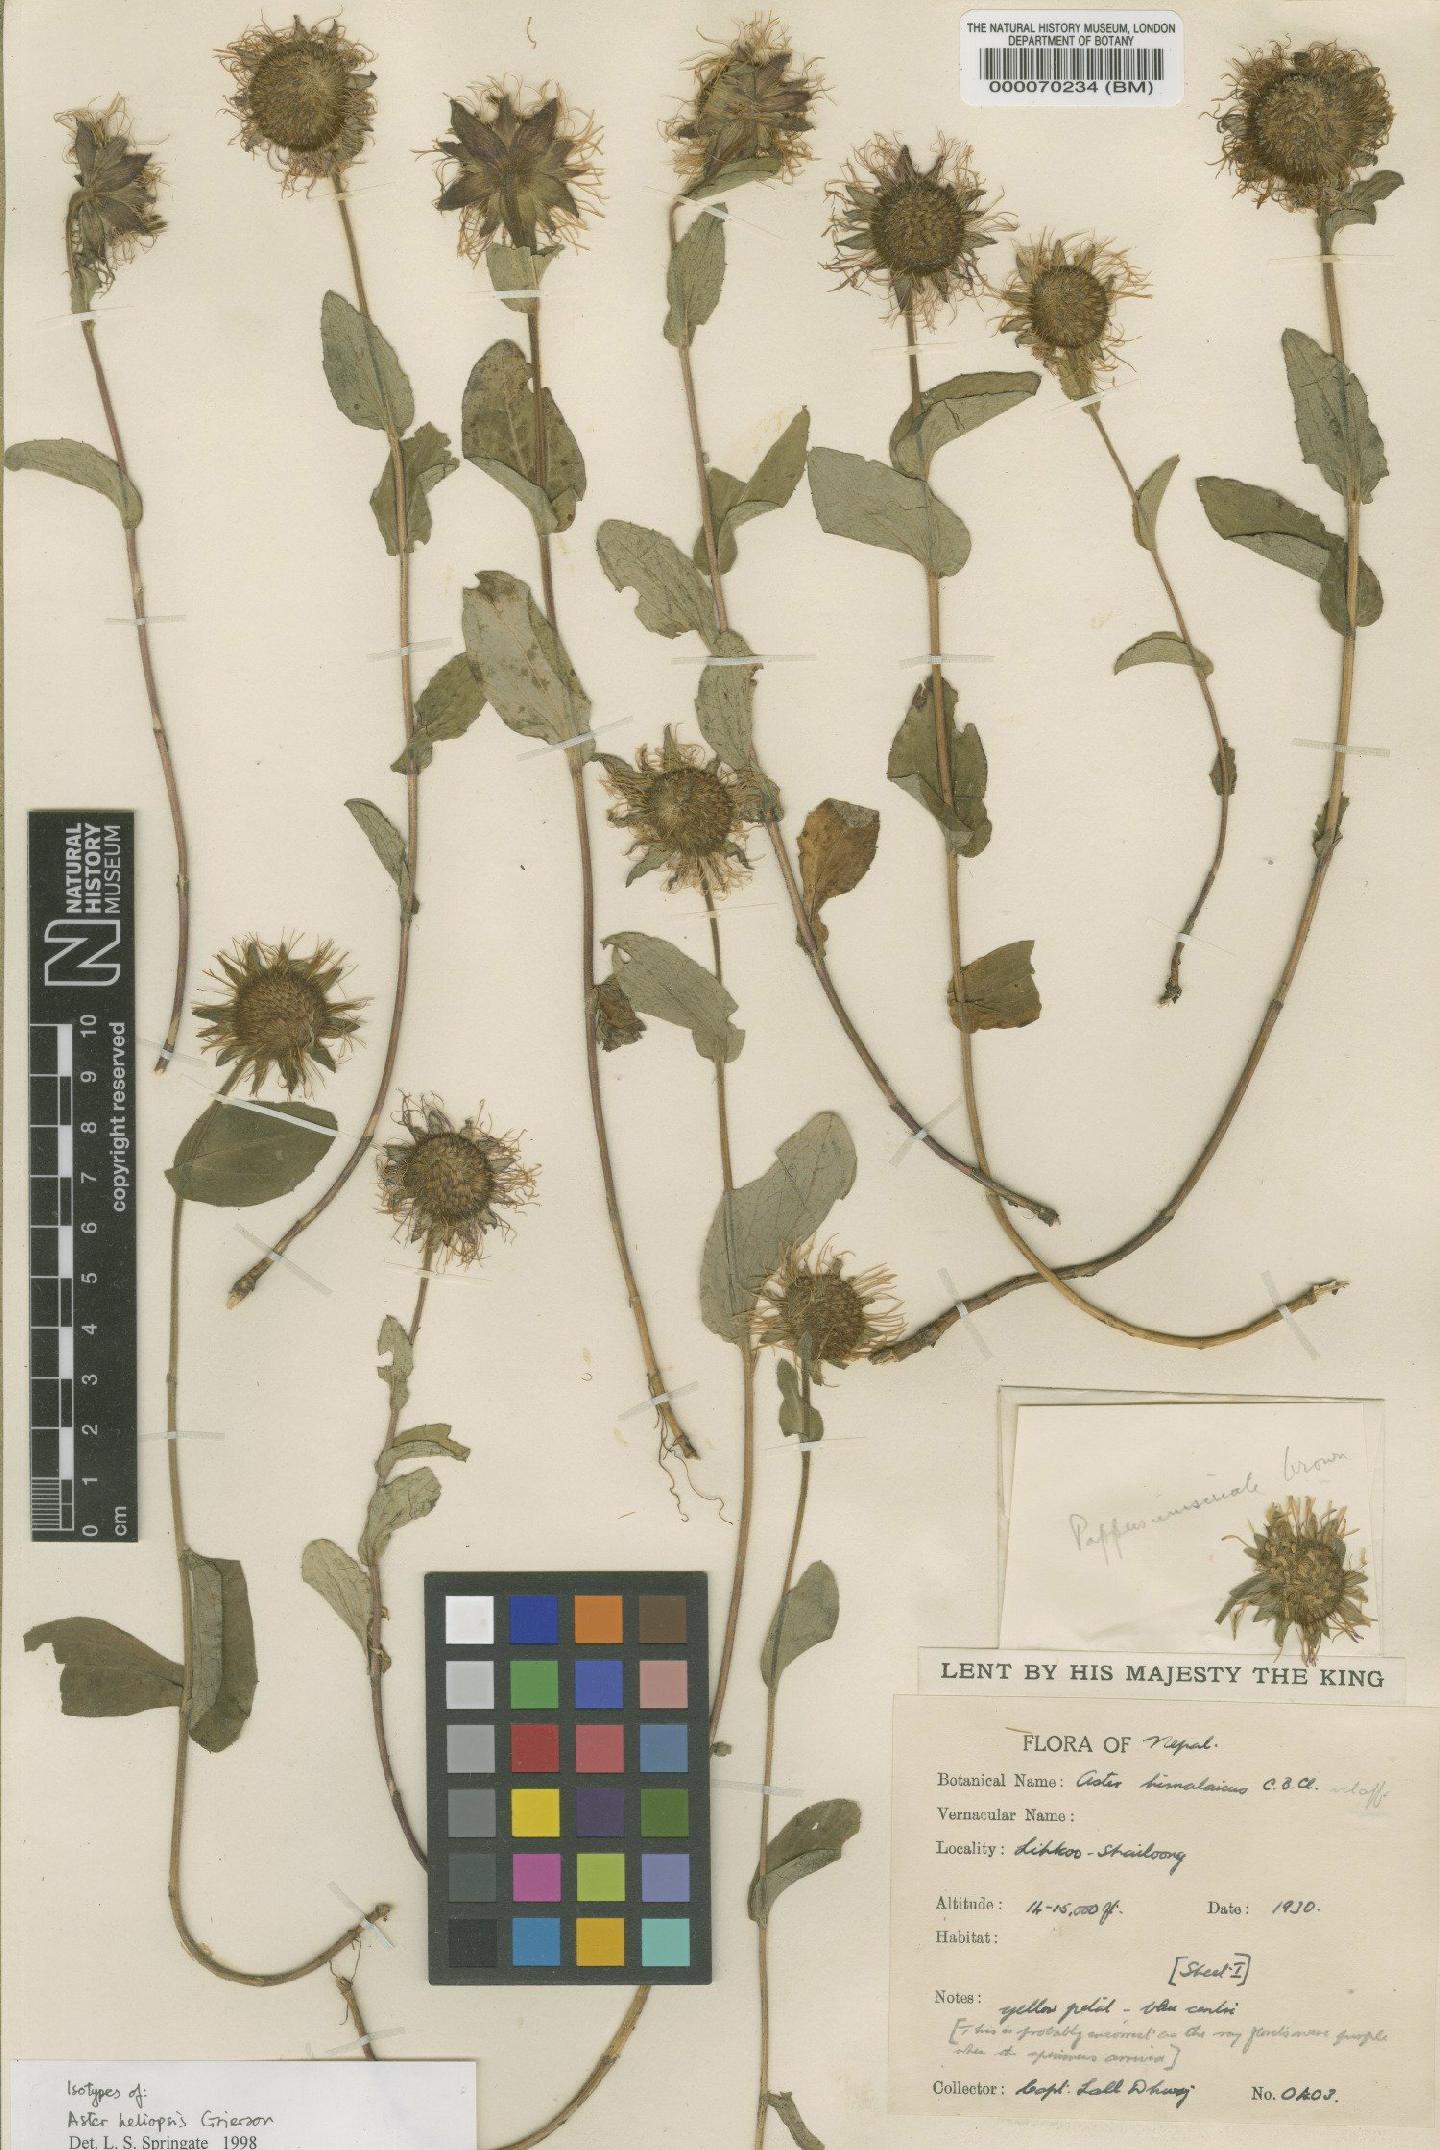 To NHMUK collection (Aster heliopsis Grierson; Isotype; NHMUK:ecatalogue:471757)